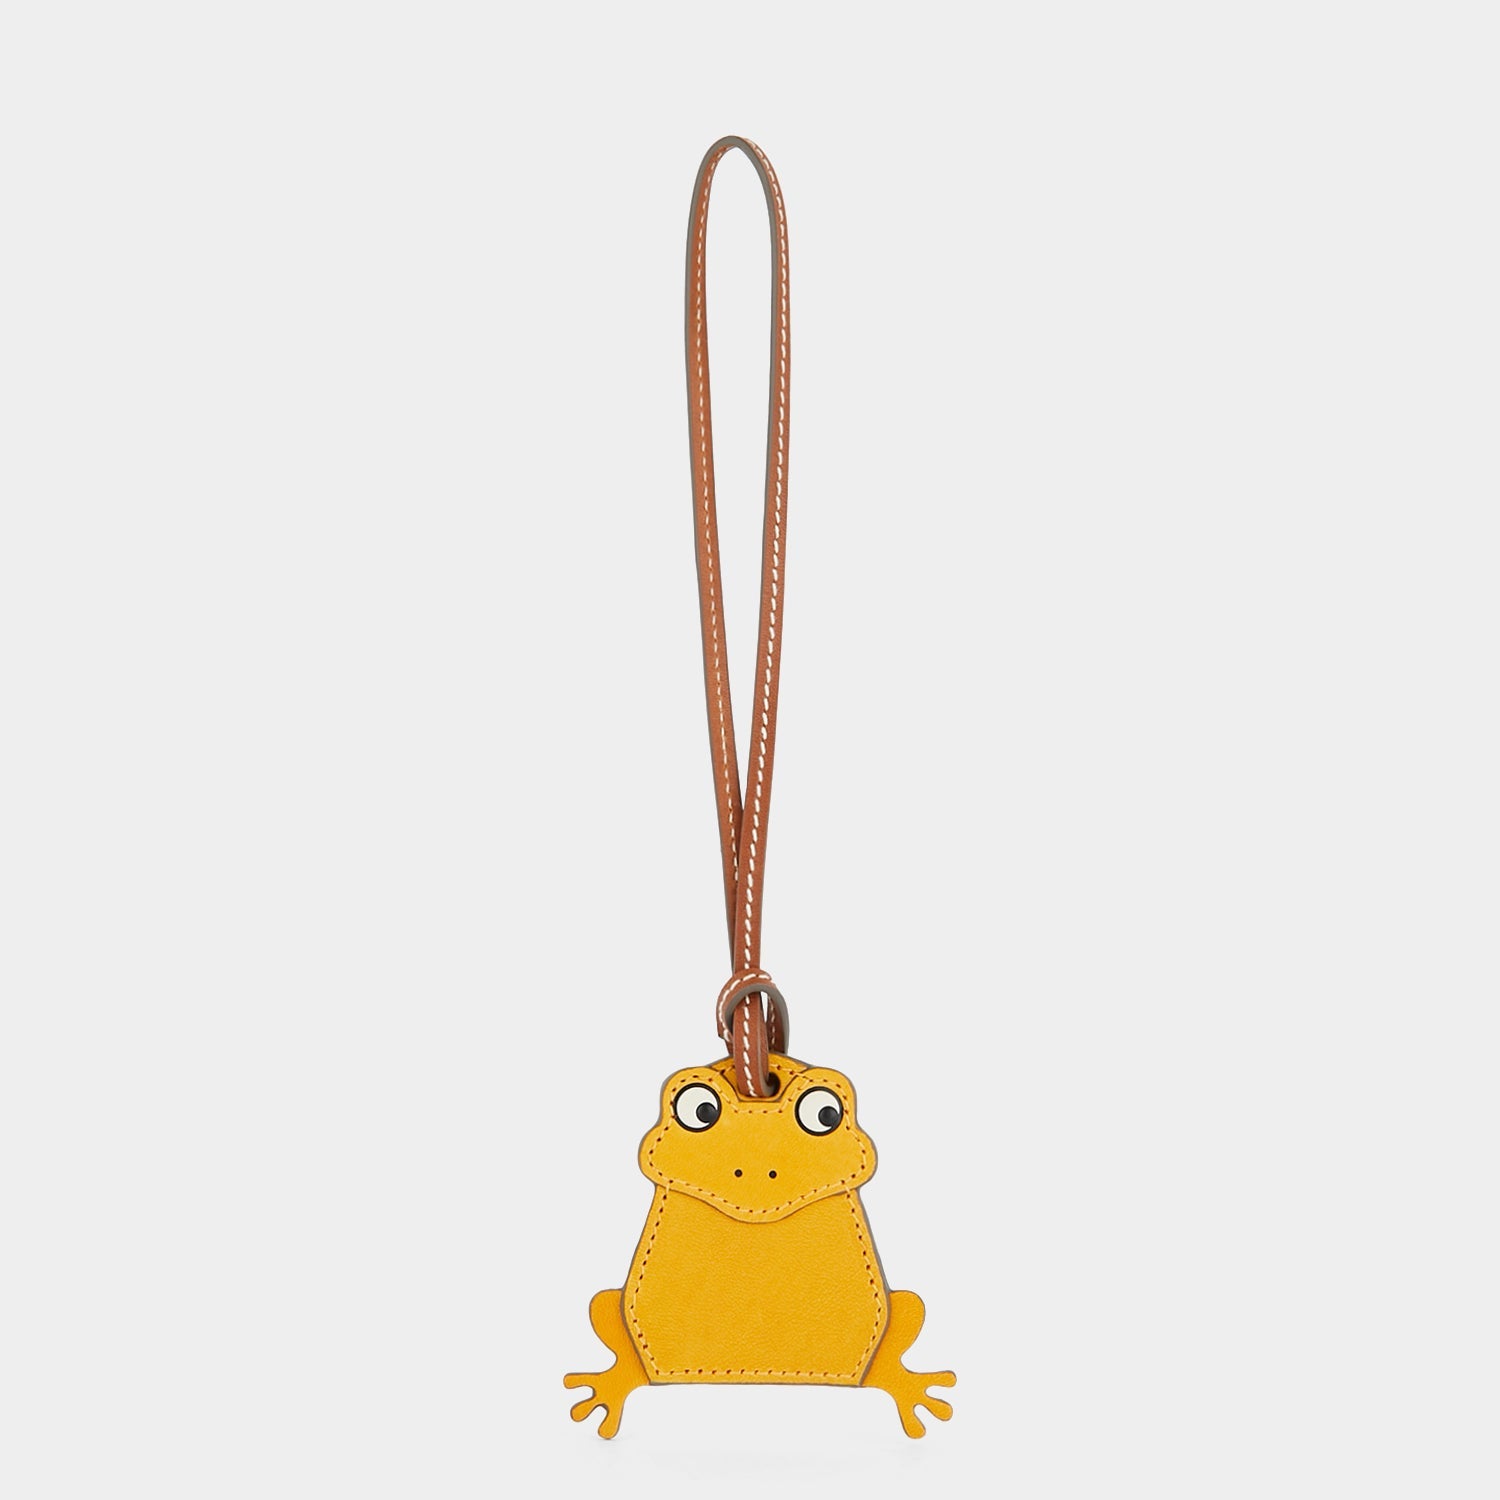 Return to Nature Frog Charm -

                  
                    Compostable Leather in Honey -
                  

                  Anya Hindmarch EU
